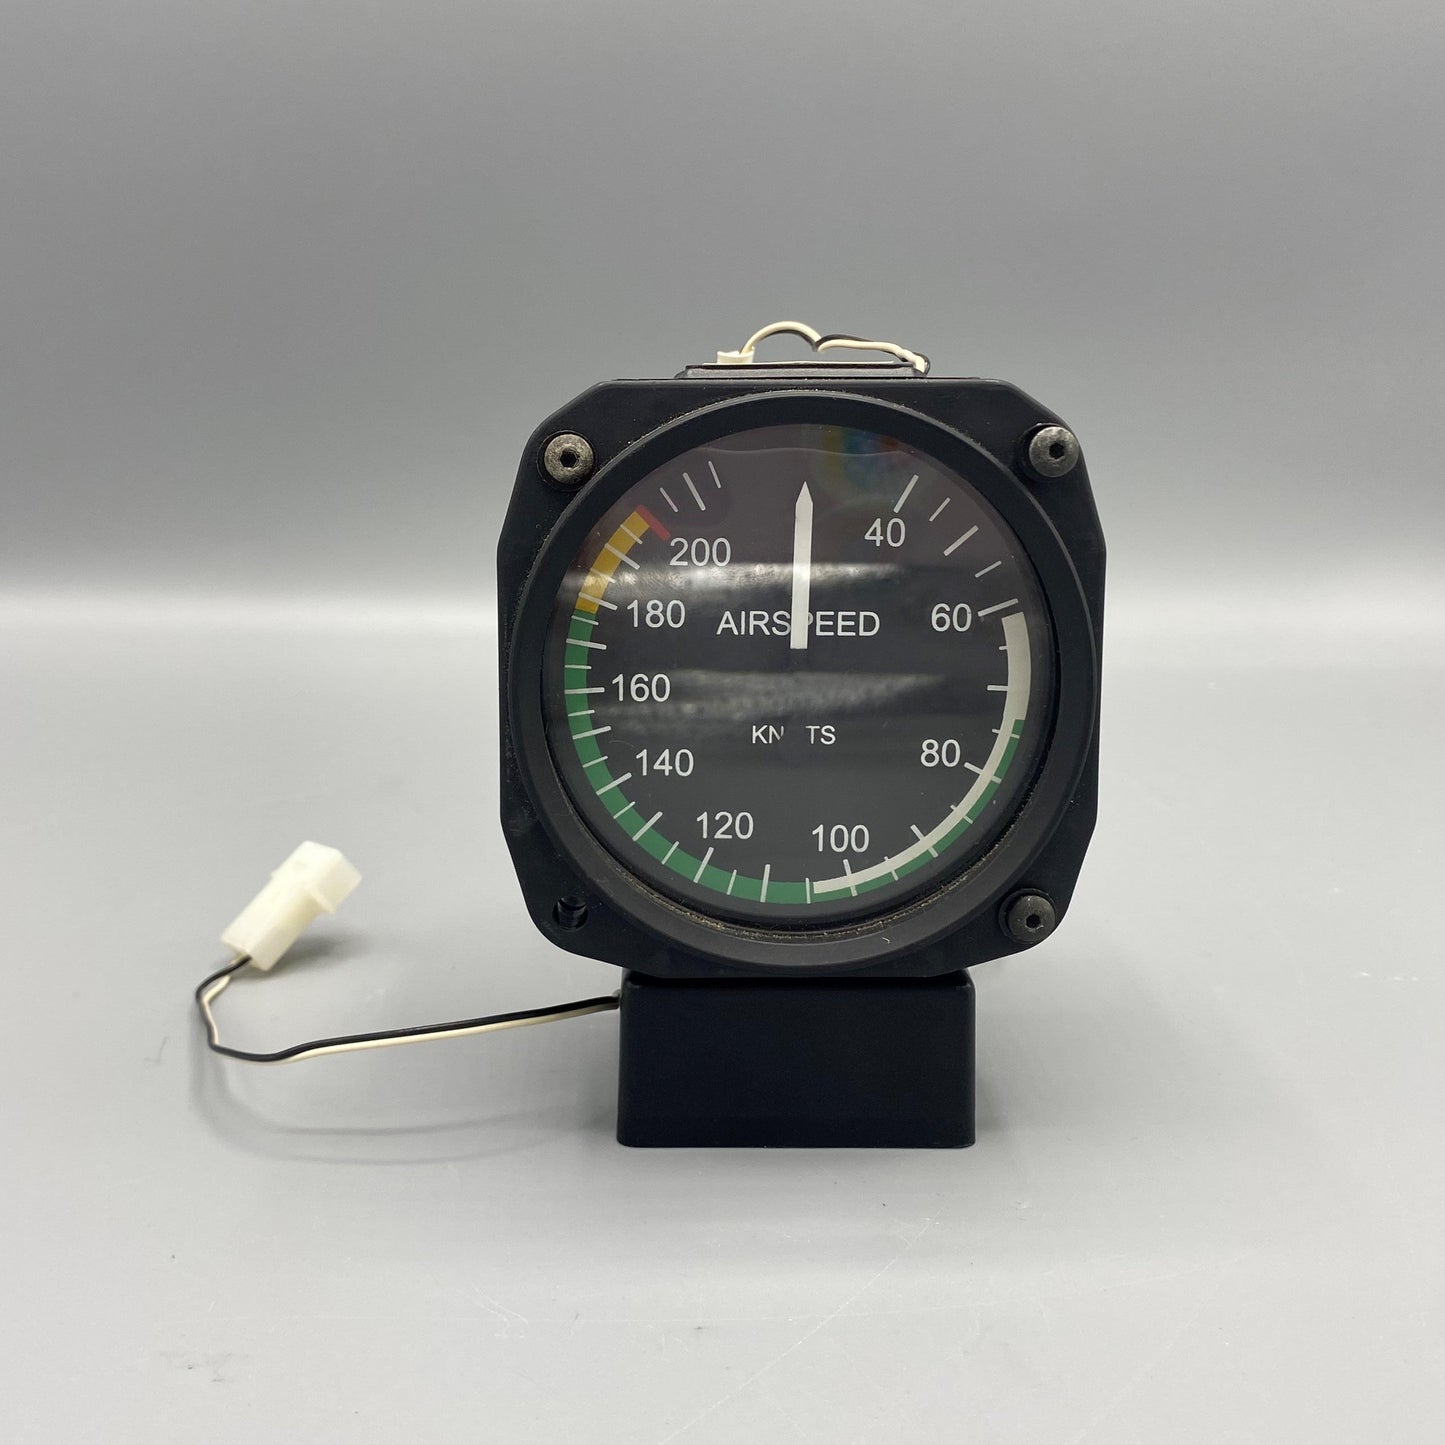 Cessna Airspeed Indicator - Part Number: 13562-003, EA175-12L-CR